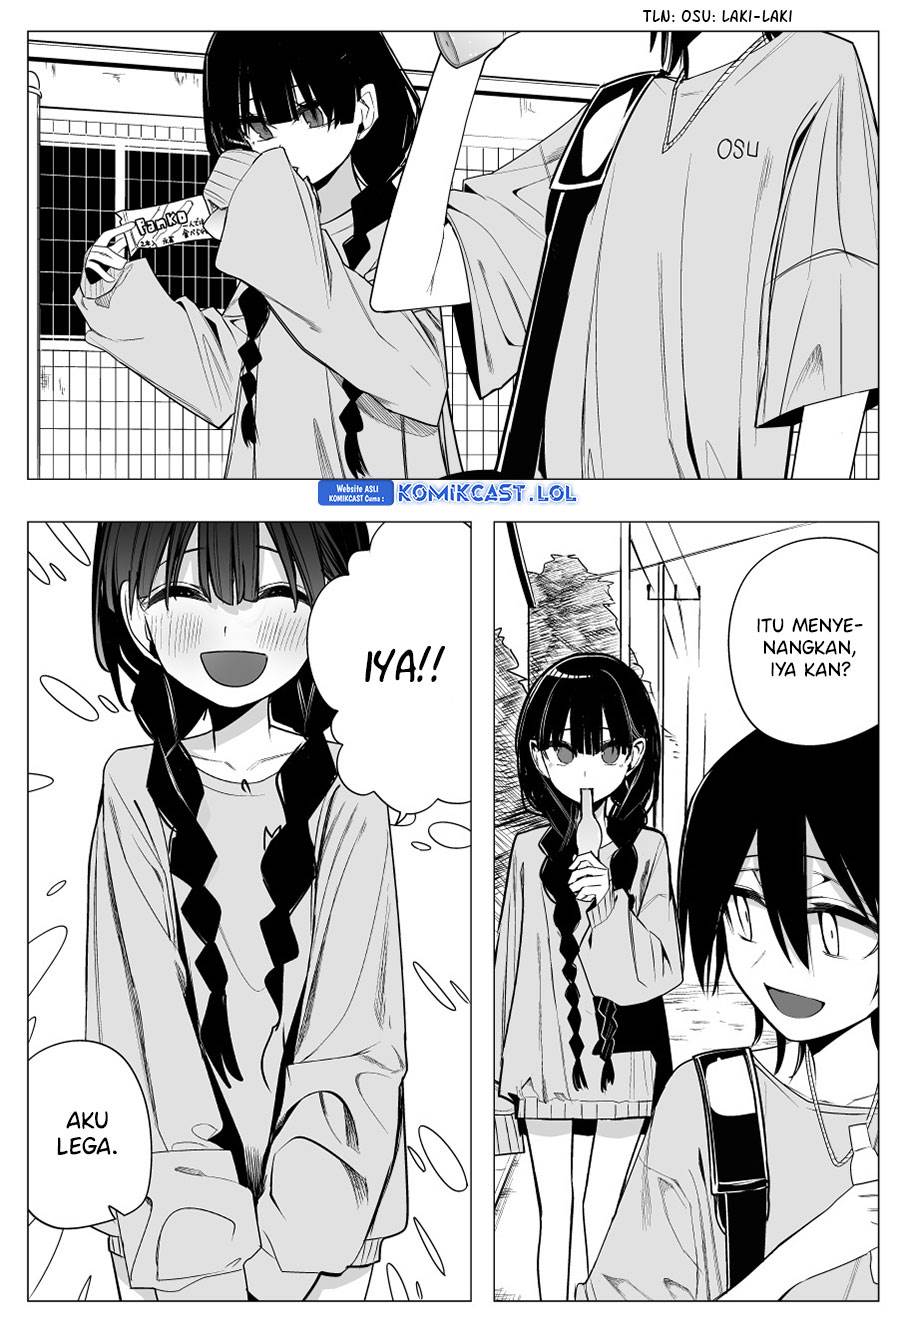 Mitsuishi-san is Being Weird This Year Chapter 32